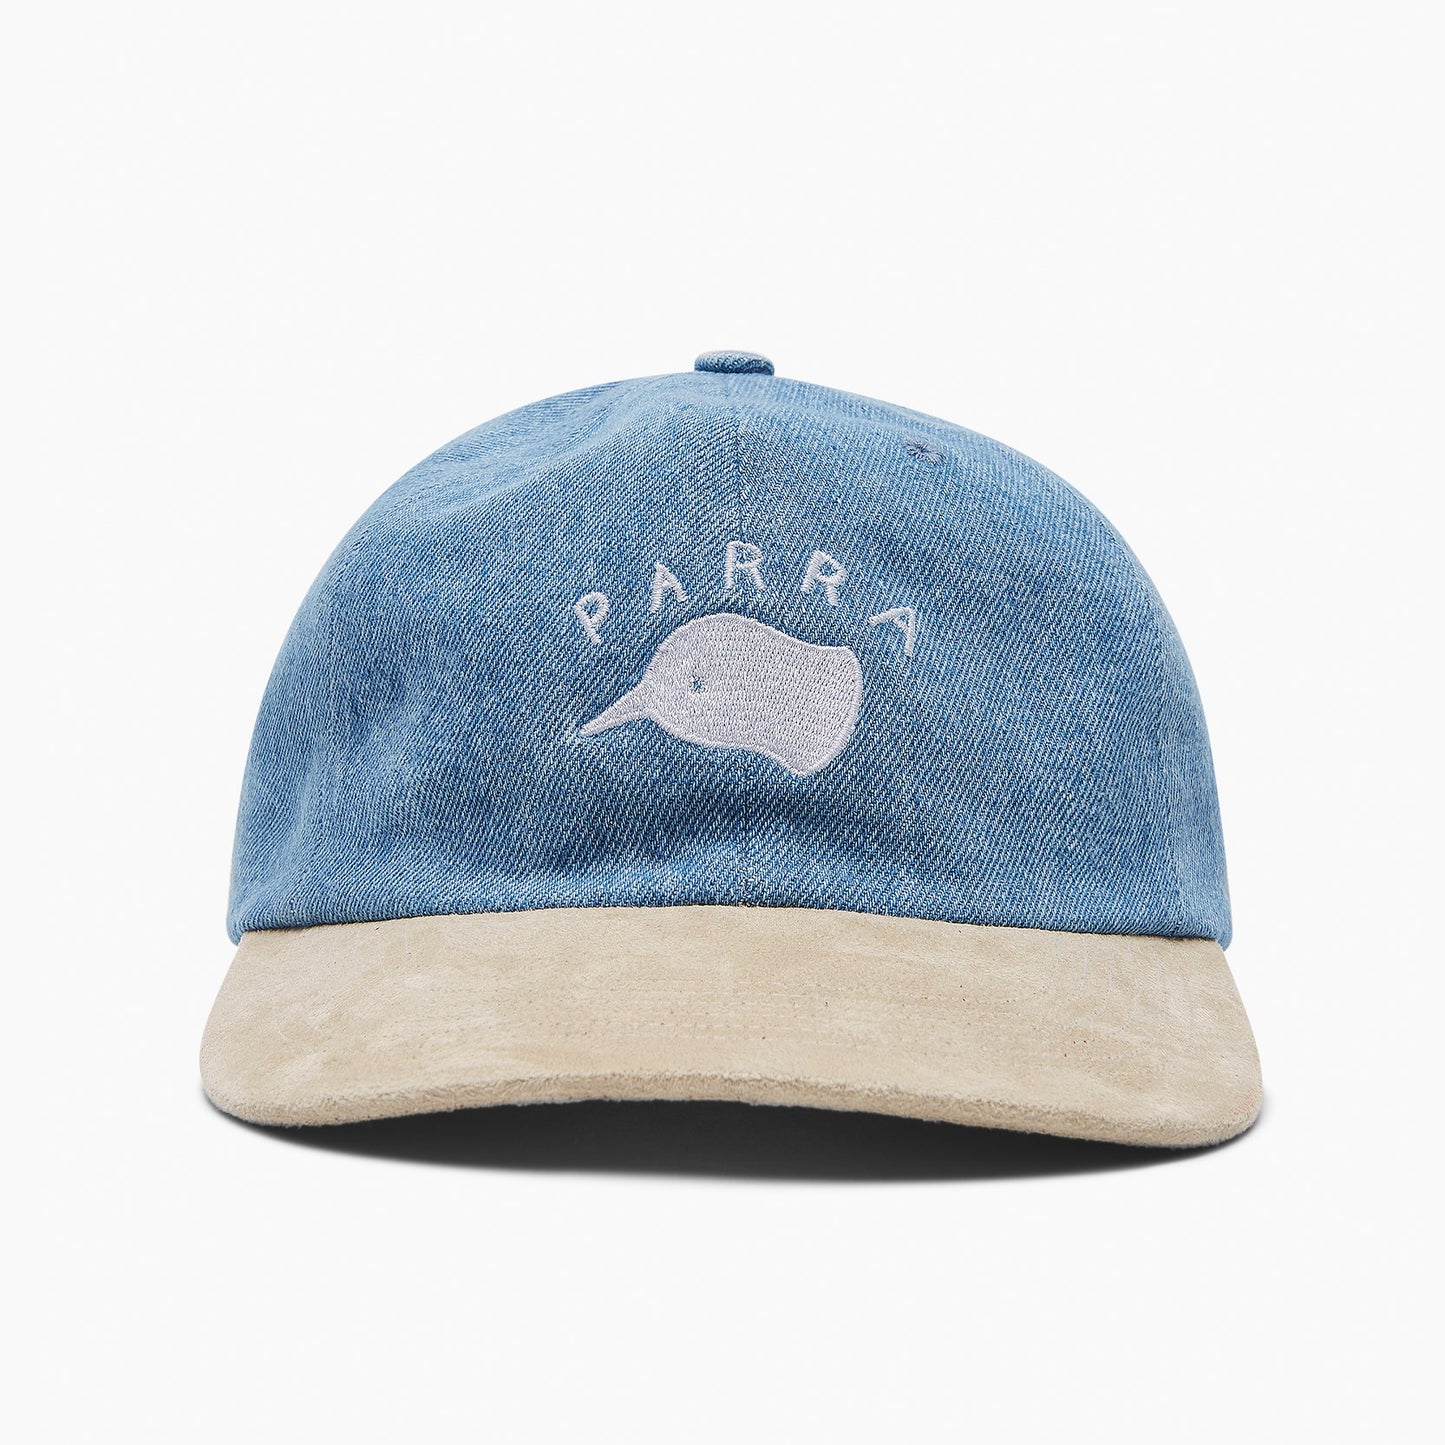 By Parra Chickenhead 6 Panel Hat